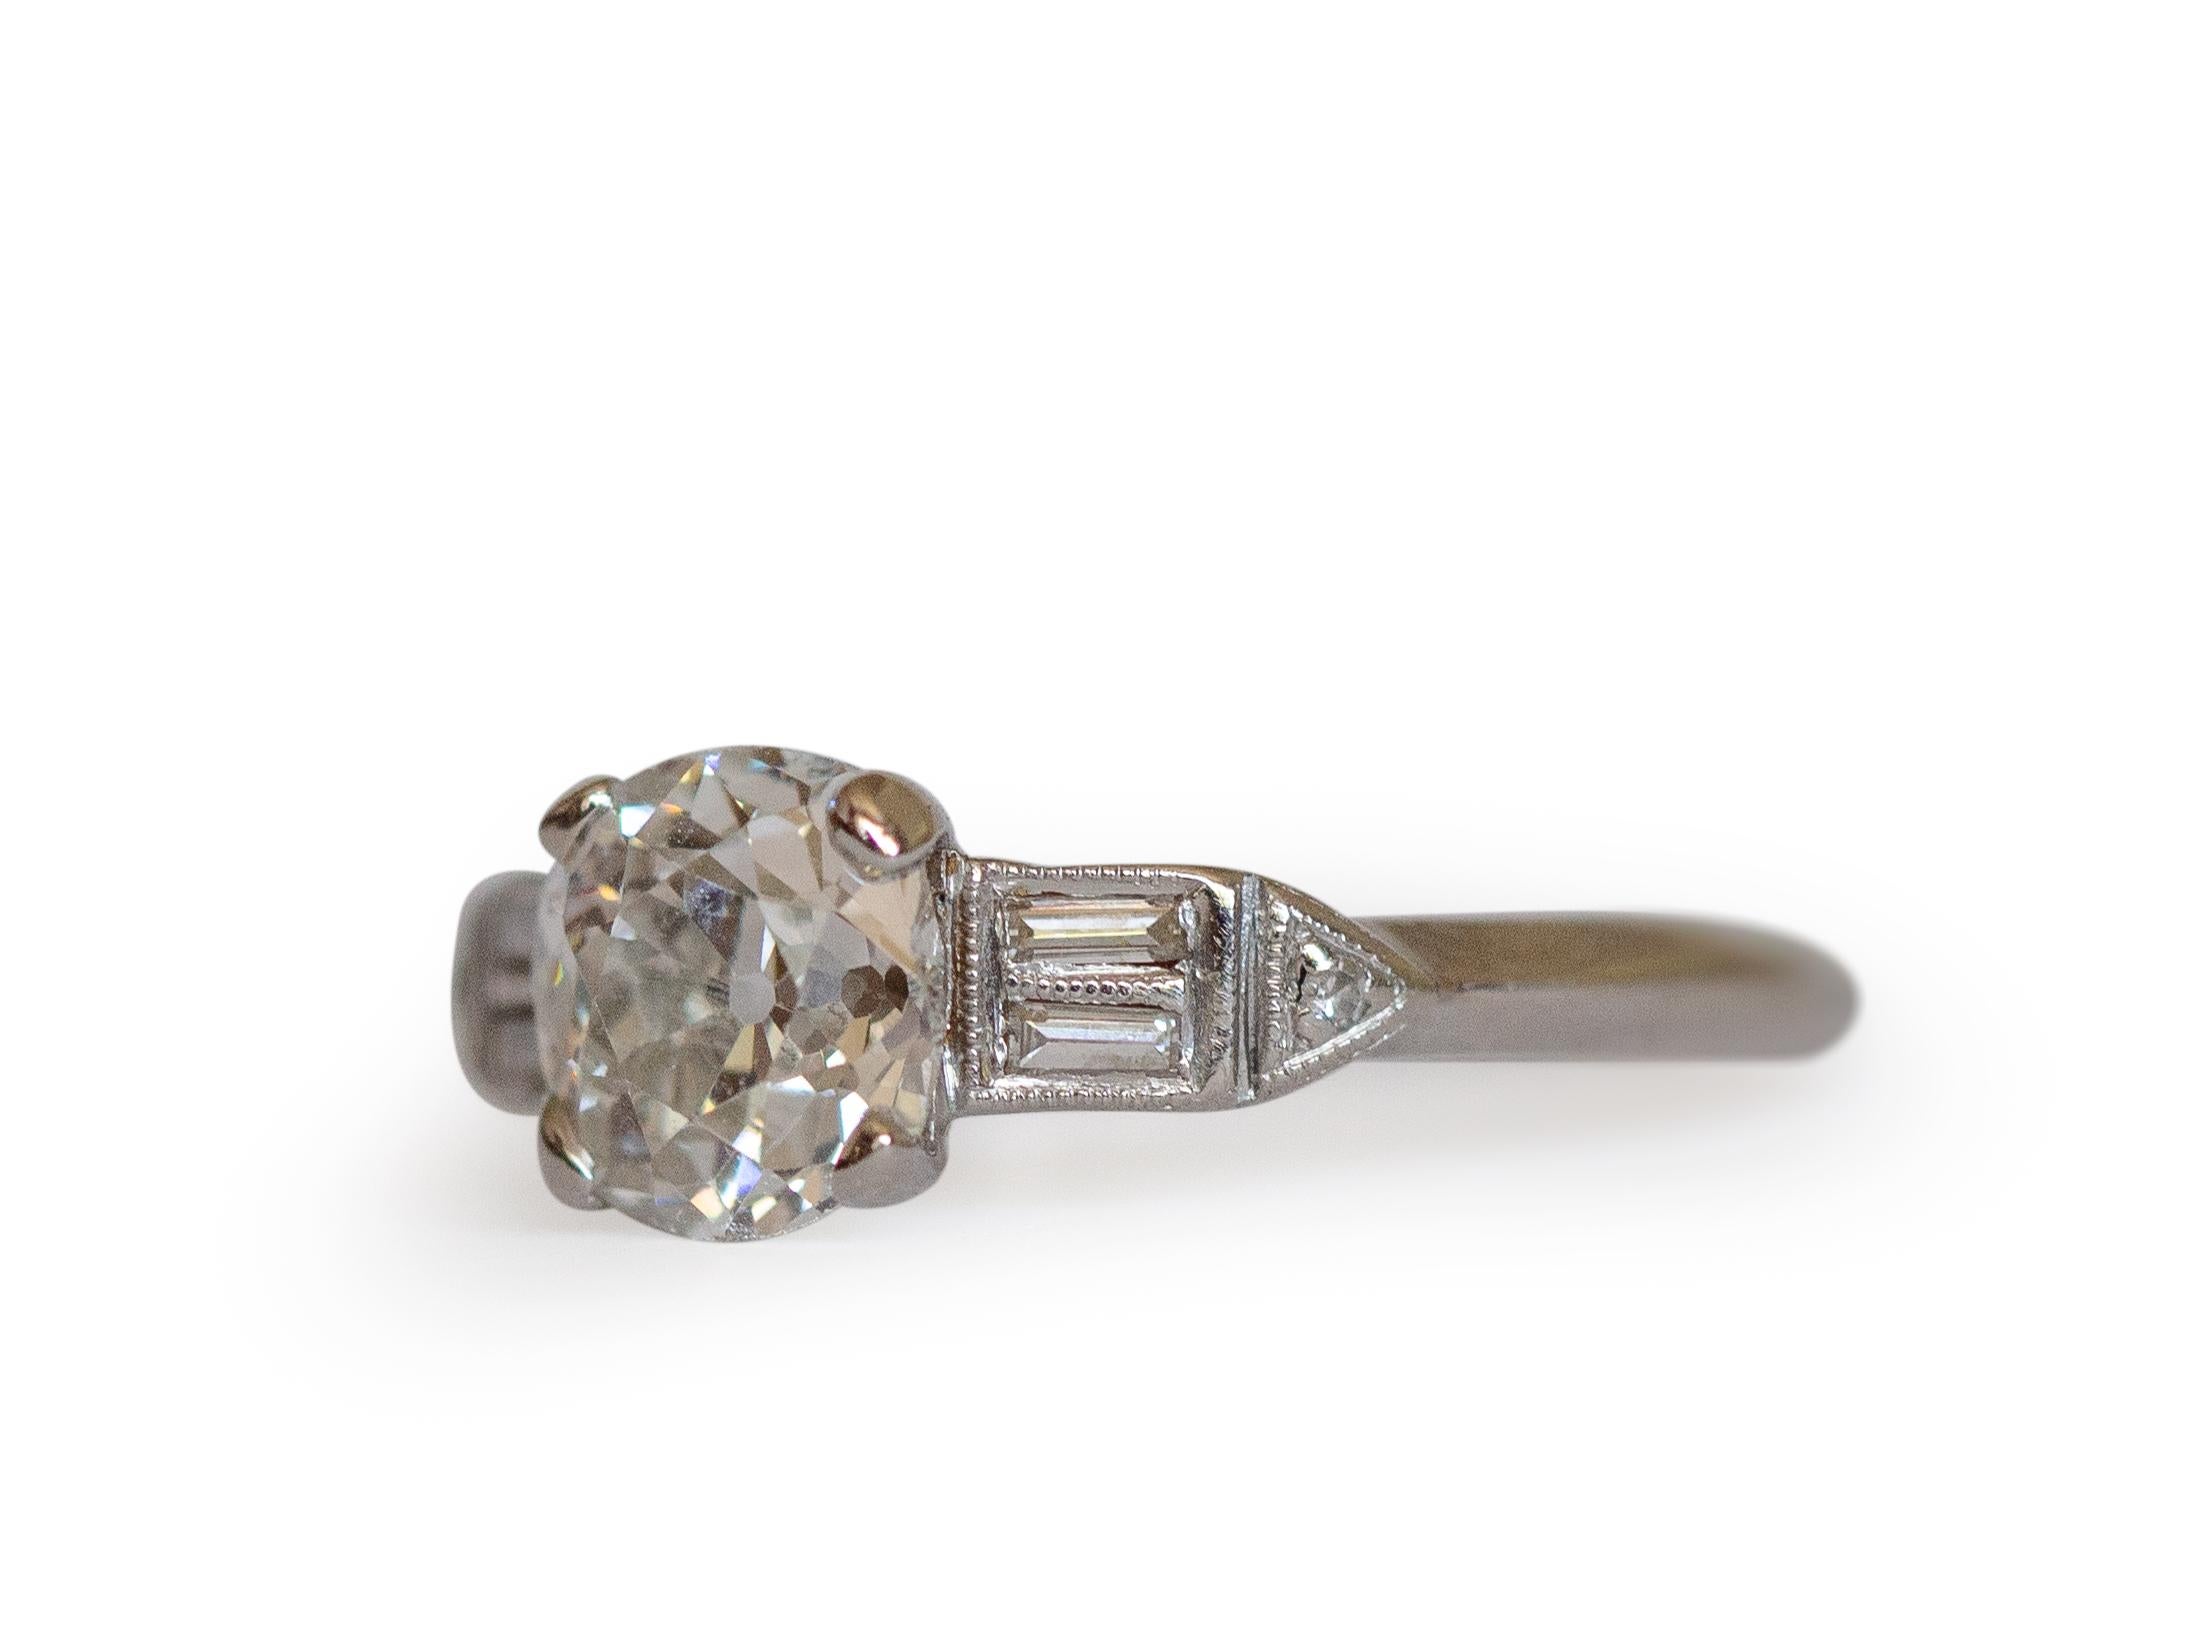 Ring Size: 7
Metal Type: Platinum  [Hallmarked, and Tested]
Weight:  3 grams

Center Diamond Details:
GIA REPORT #: 2215104049
Weight: 1.13 carat
Cut: Old Mine Brilliant, Antique Cushion
Color: I
Clarity: SI1

Side Diamond Details:
Weight: .20